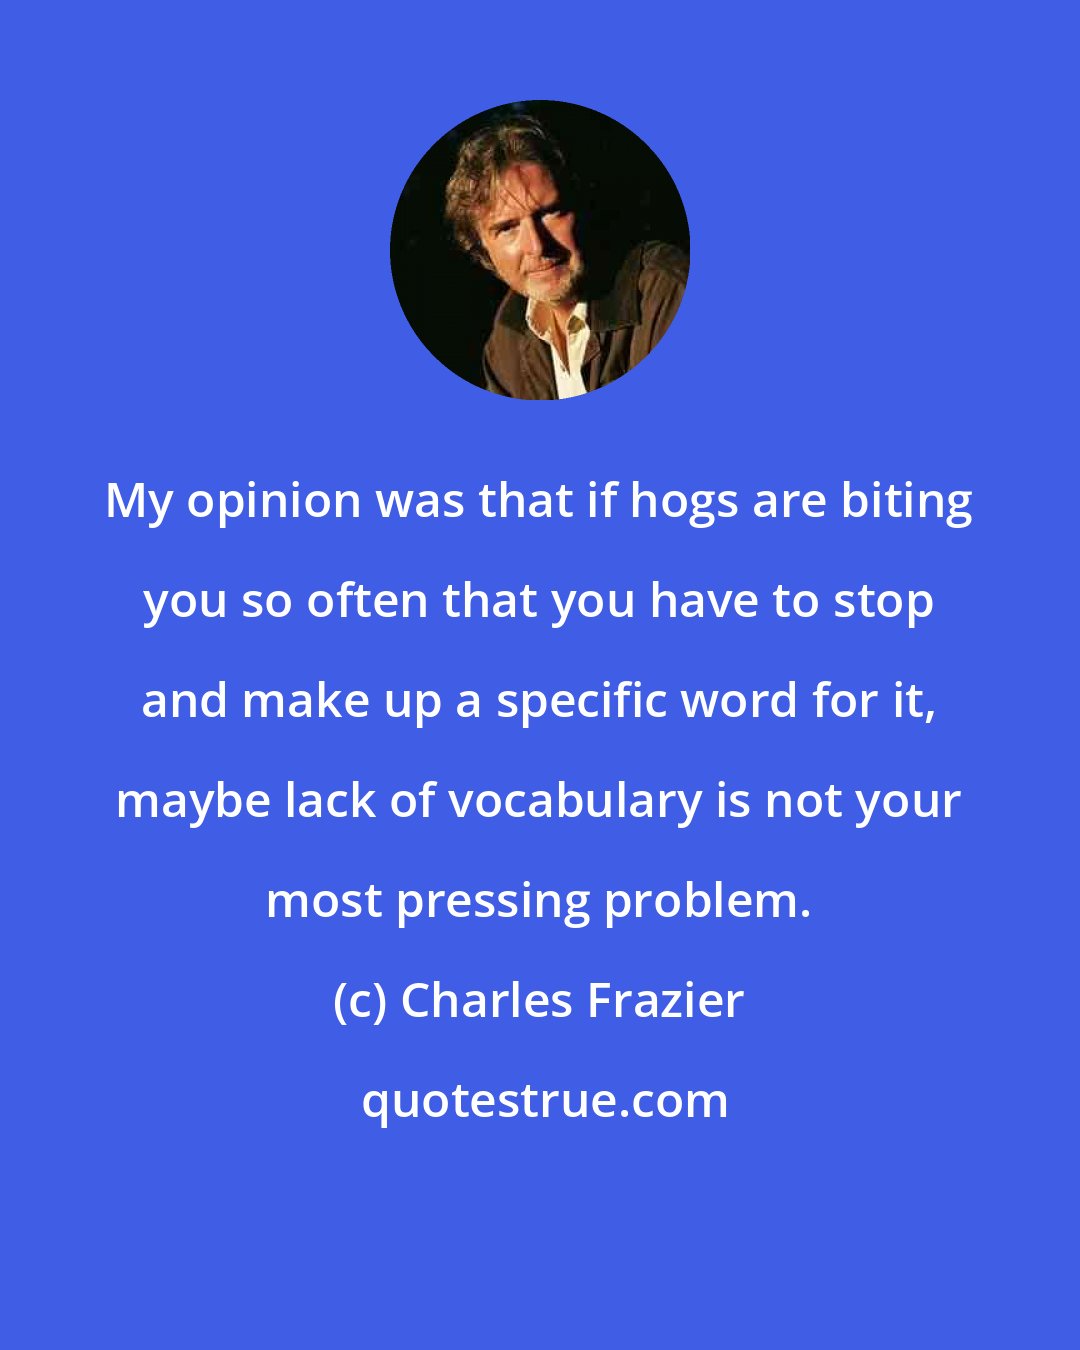 Charles Frazier: My opinion was that if hogs are biting you so often that you have to stop and make up a specific word for it, maybe lack of vocabulary is not your most pressing problem.